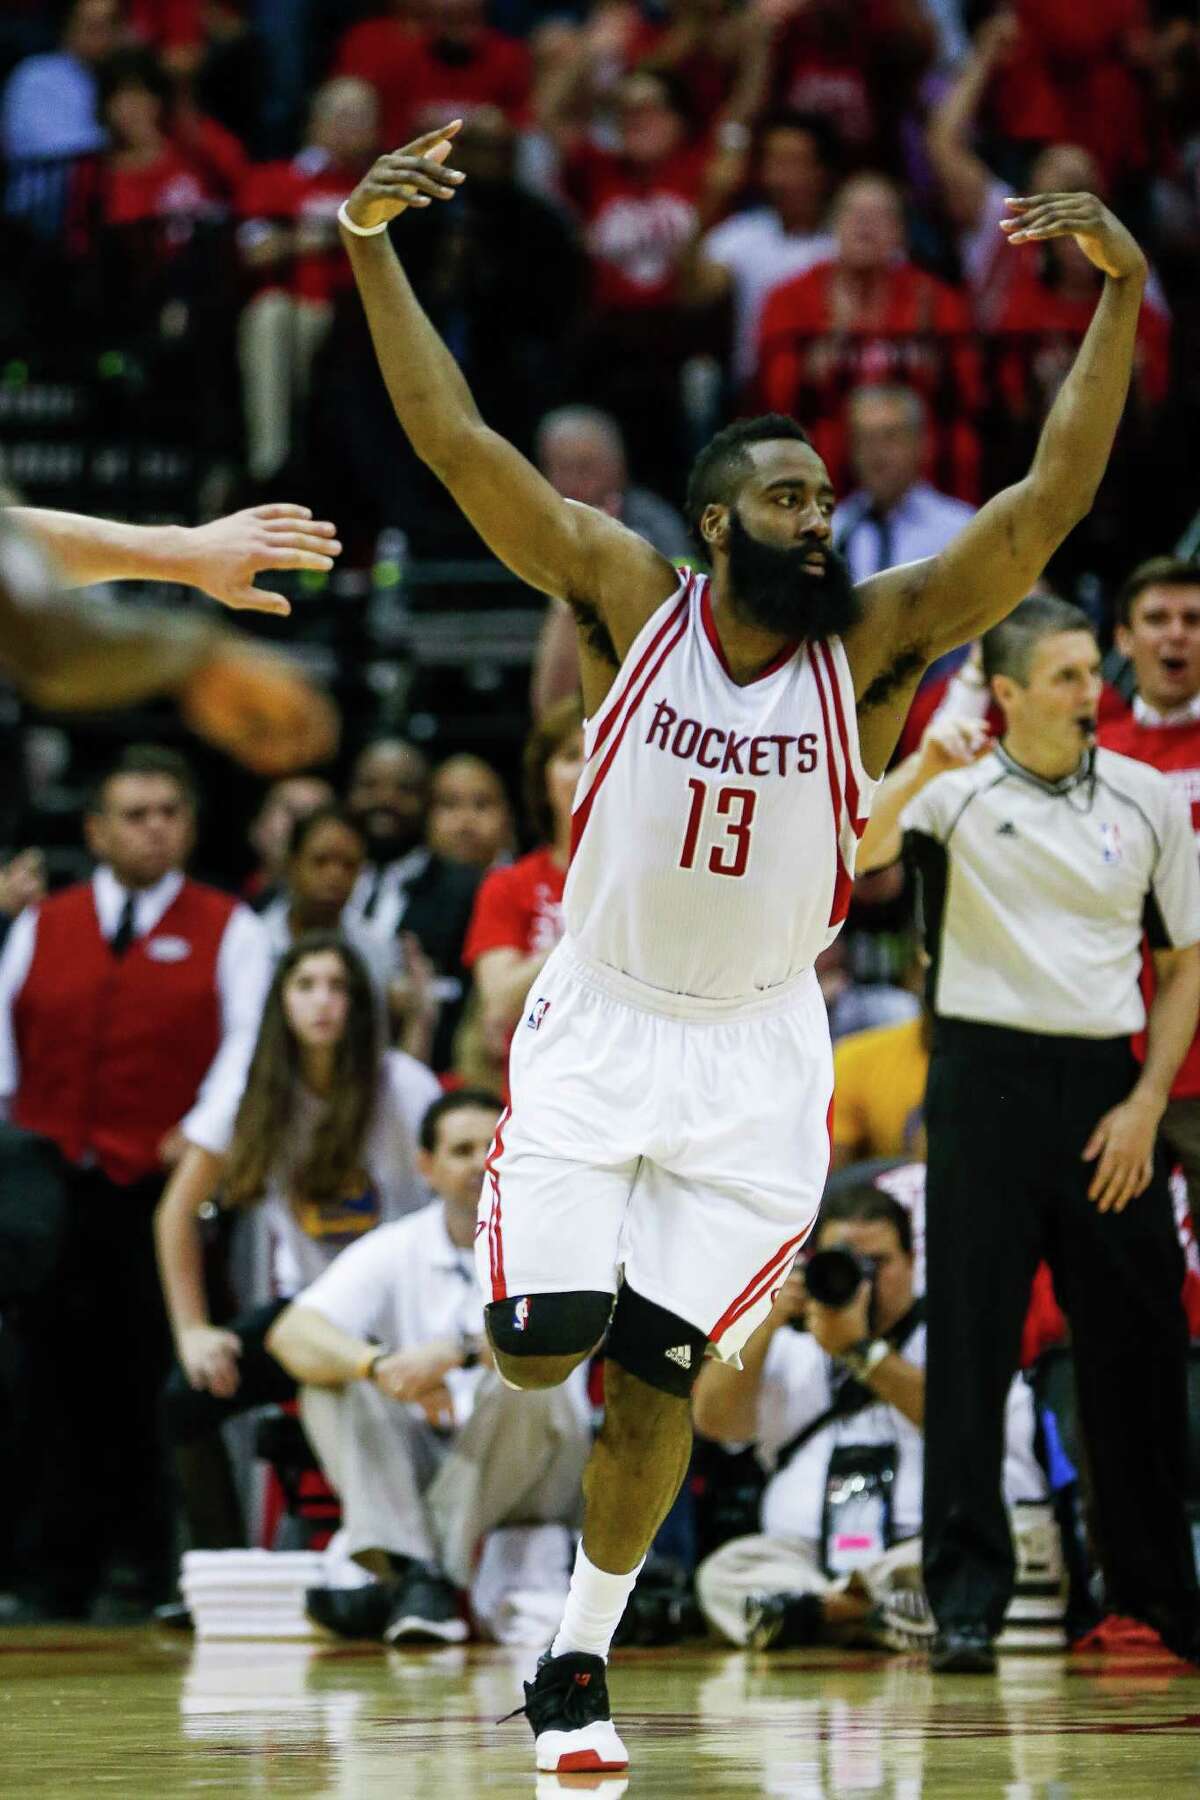 Houston Rockets guard James Harden (13) celebrates after a slam dunk against the Golden State Warriors during the second half in game three of a first-round NBA Playoffs series at Toyota Center Thursday, April 21, 2016 in Houston.